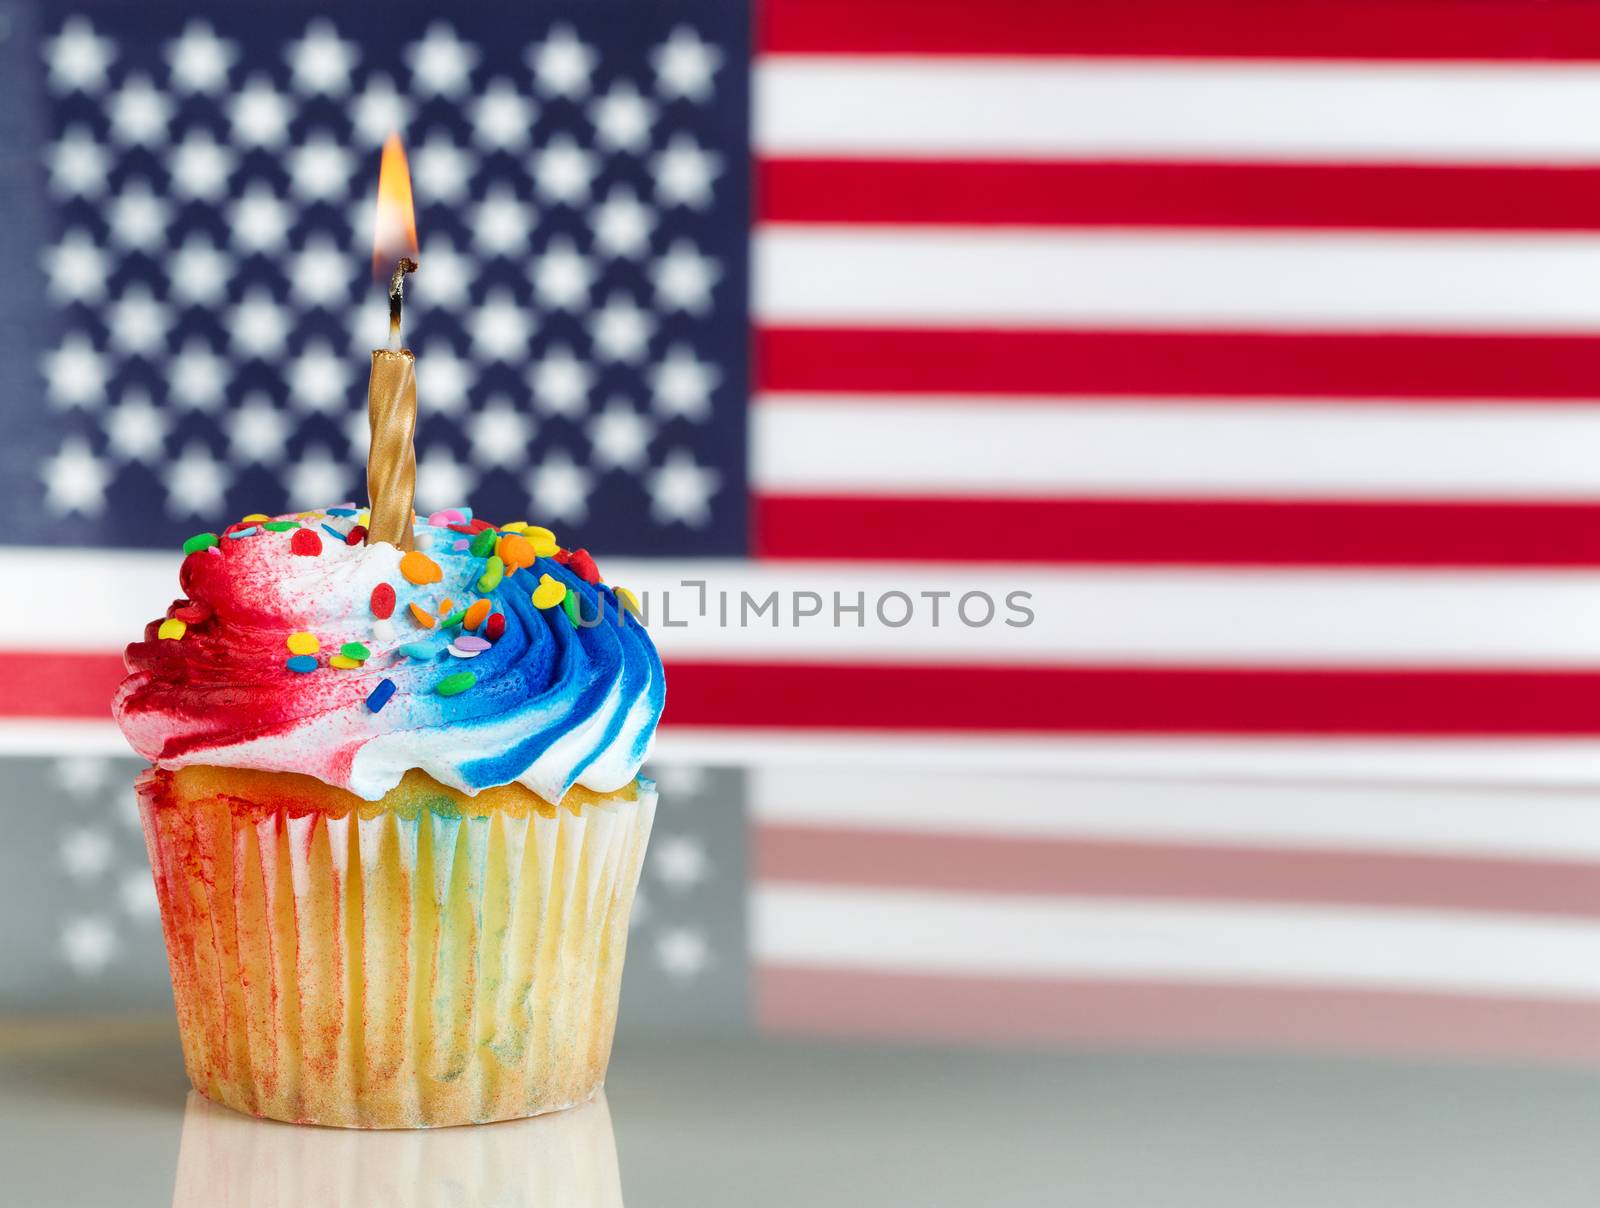 Close up of a red, white, and blue frosted cupcake with burning candle. Fourth of July concept with United States of American flag in background.